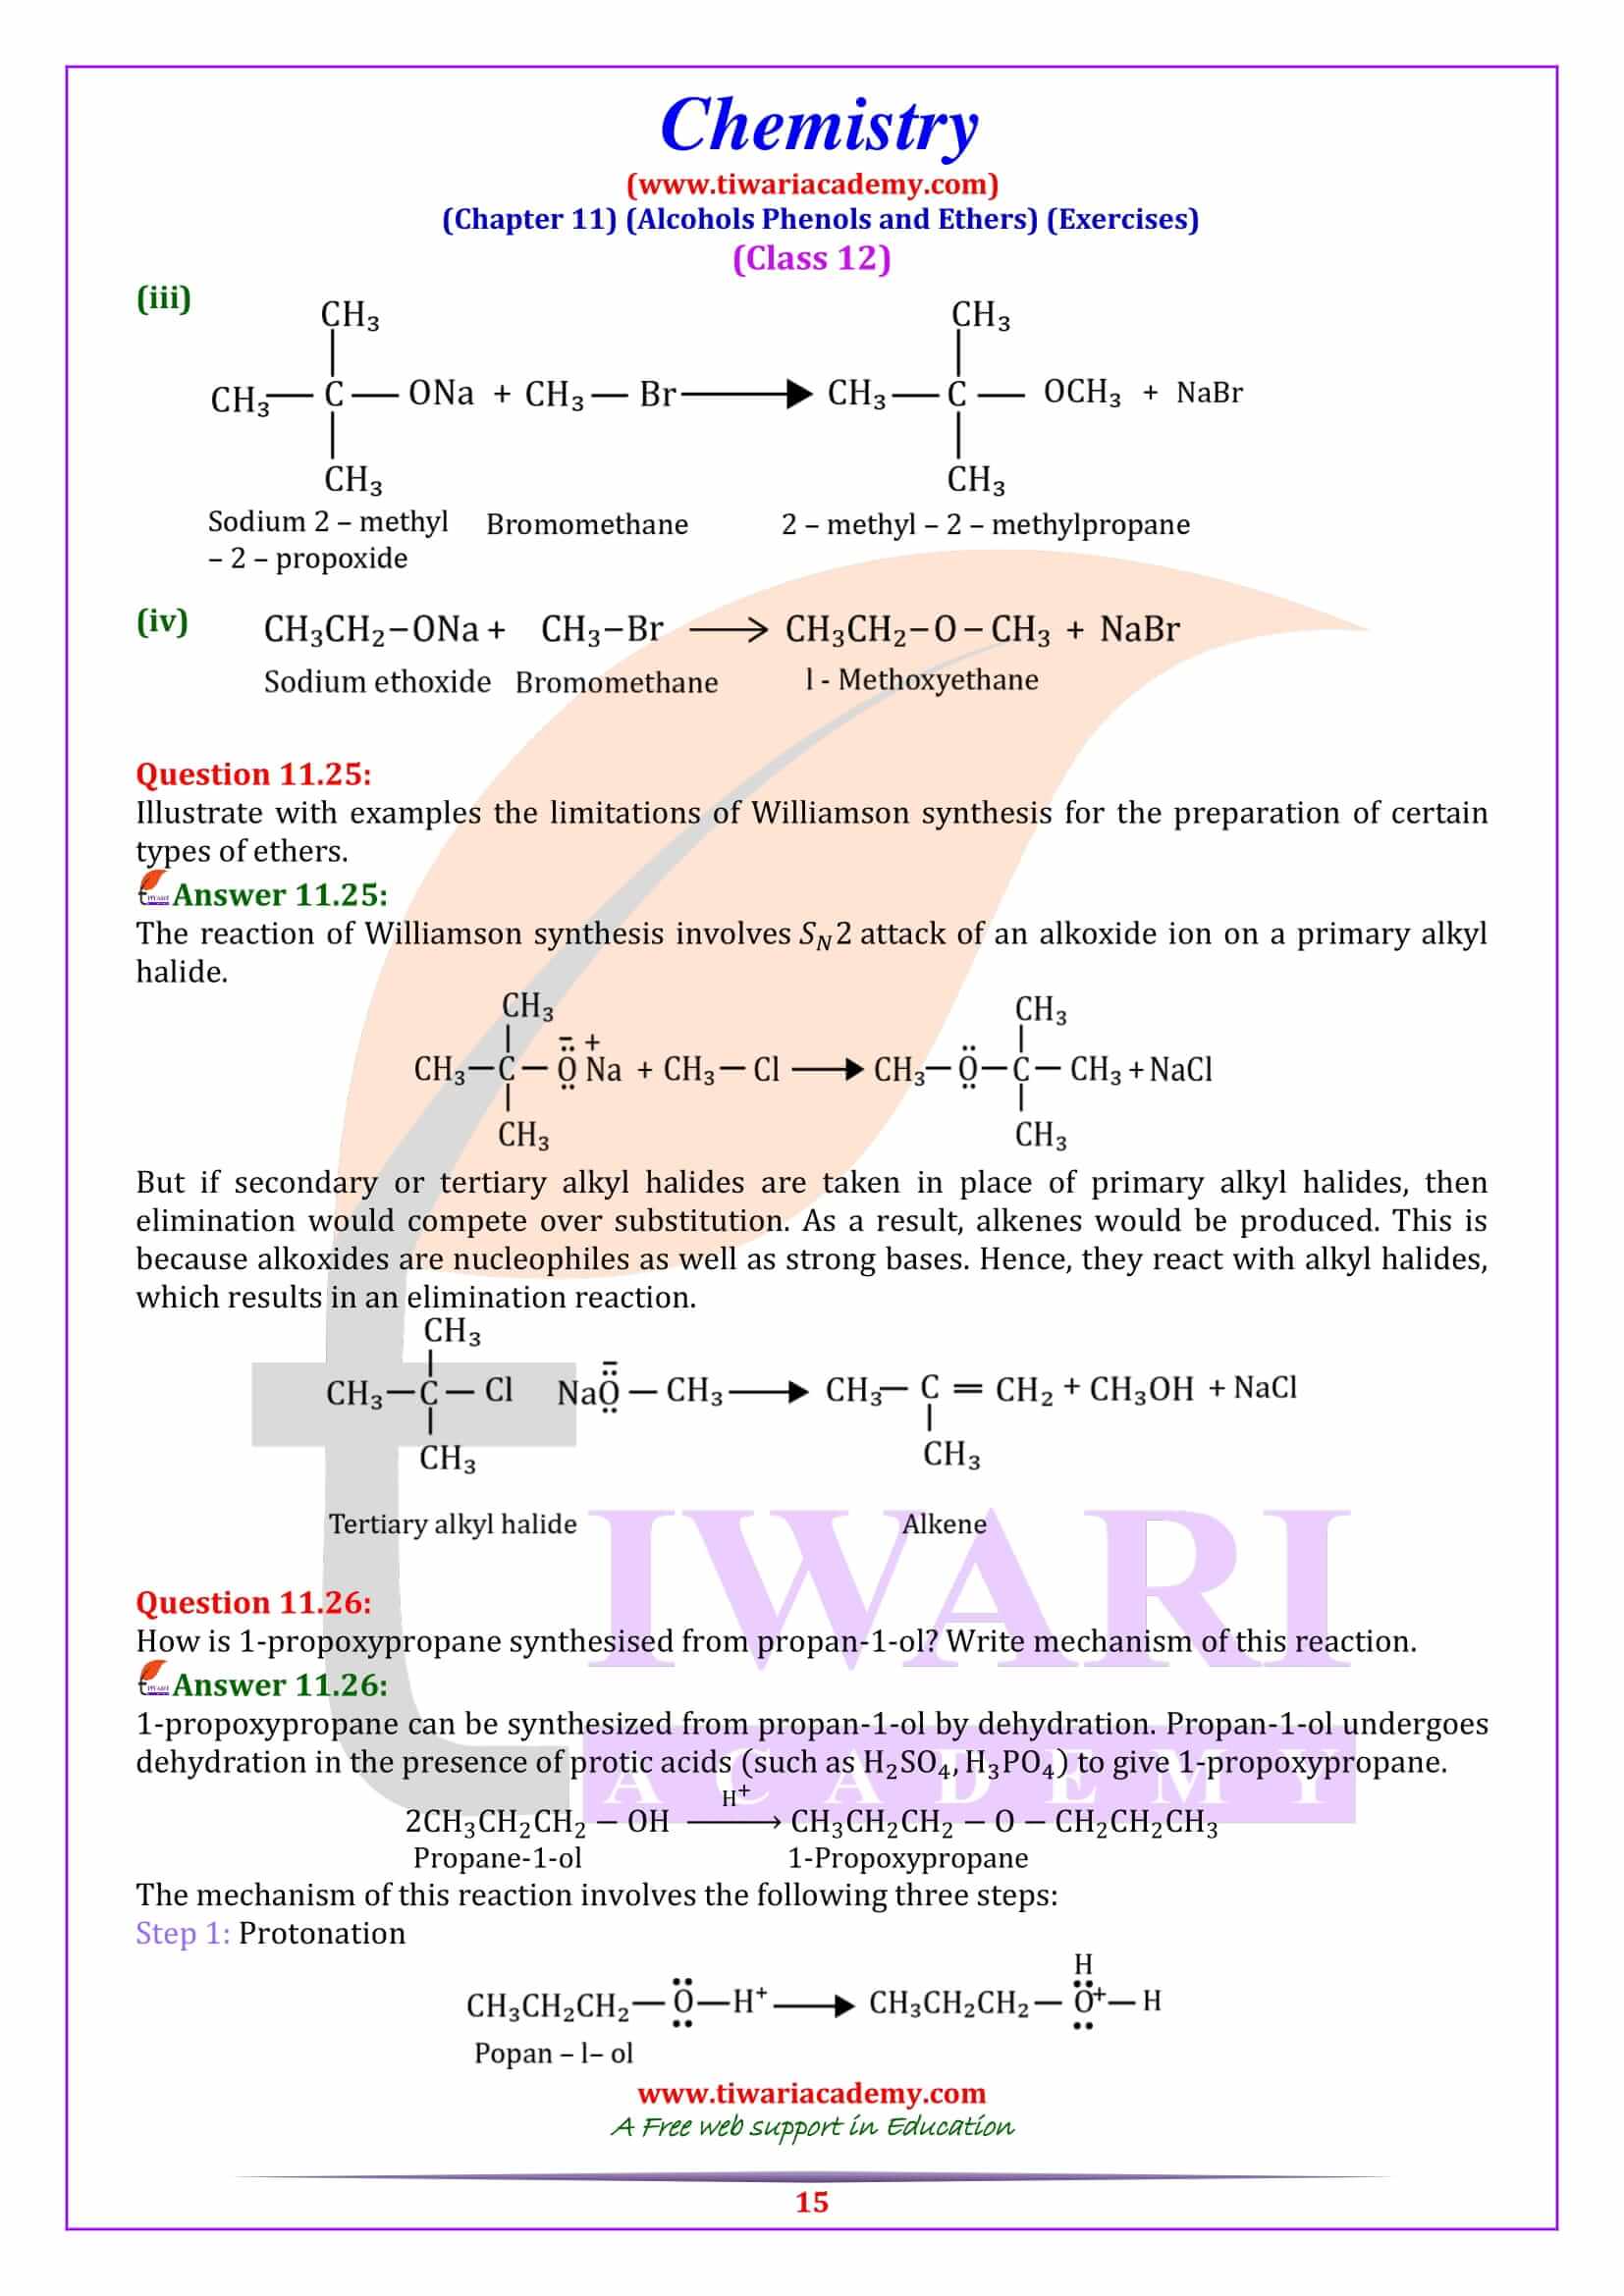 Class 12 Chemistry Chapter 11